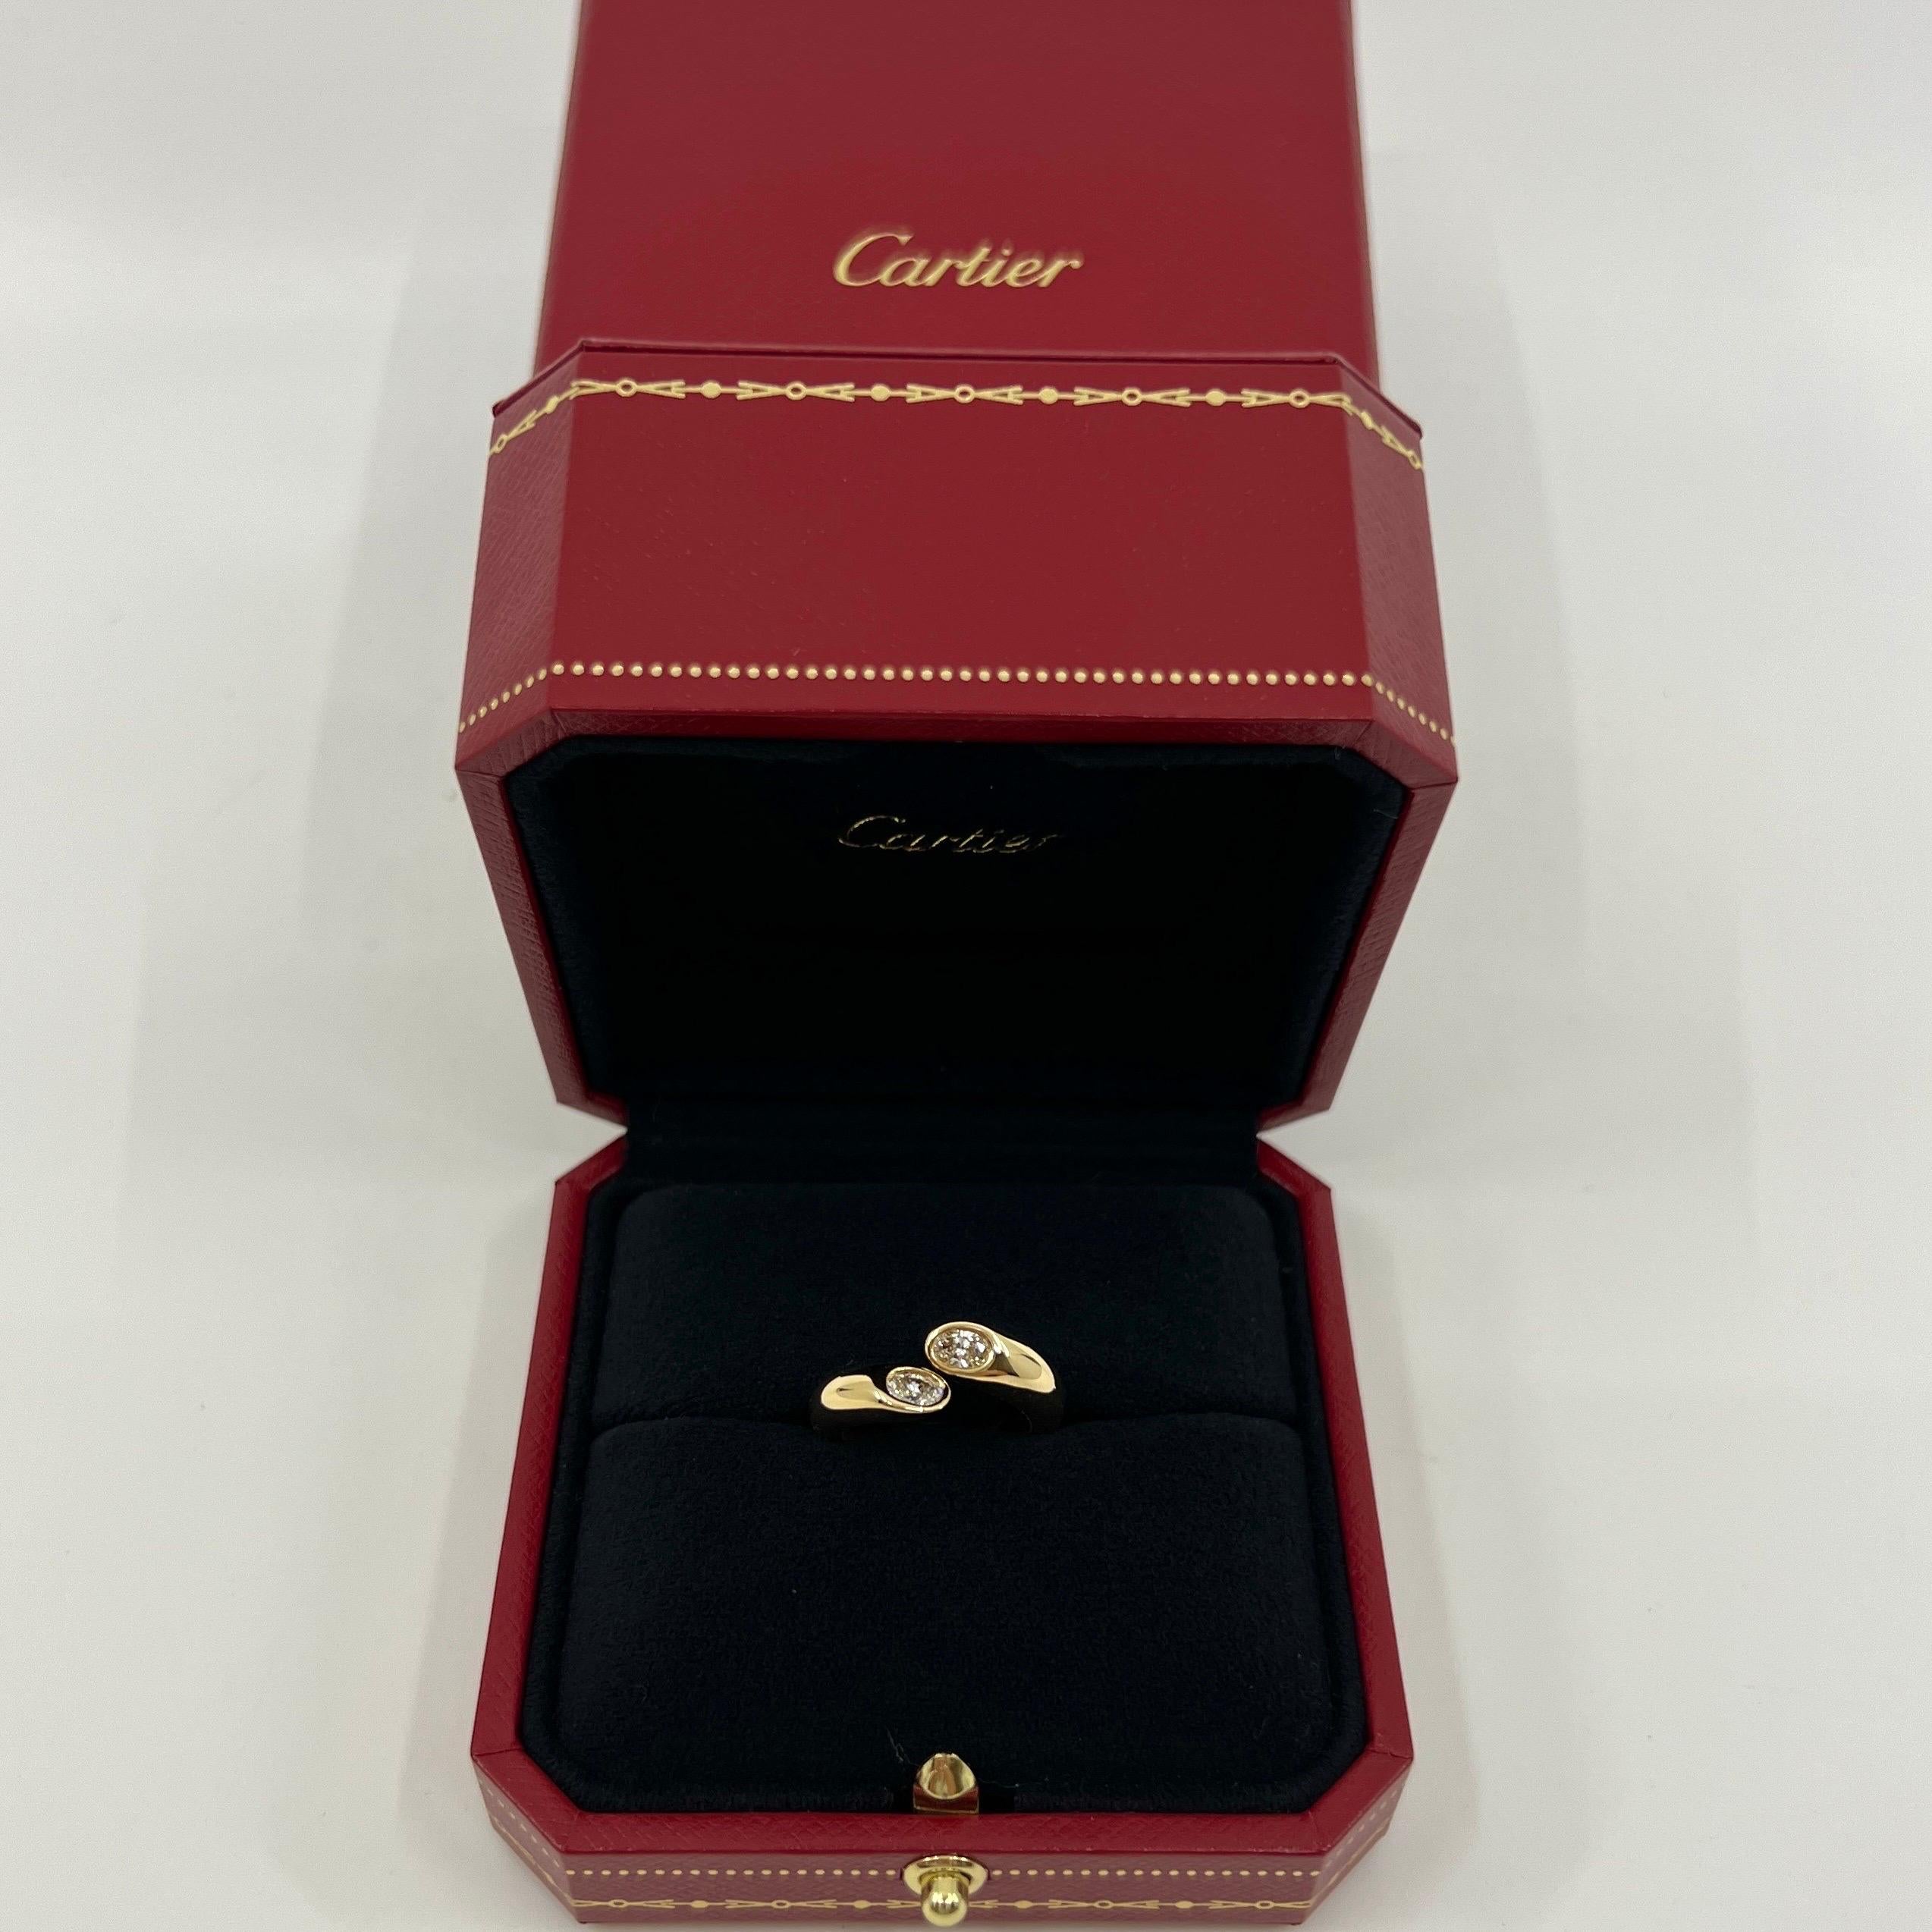 Vintage Cartier Oval Cut Natural Diamond 18k Yellow Gold Split Bypass Ring.

Stunning yellow gold ring set with 2 fine oval brilliant cut natural diamonds. 
Fine jewellery houses like Cartier only use the finest of gemstones in their pieces and